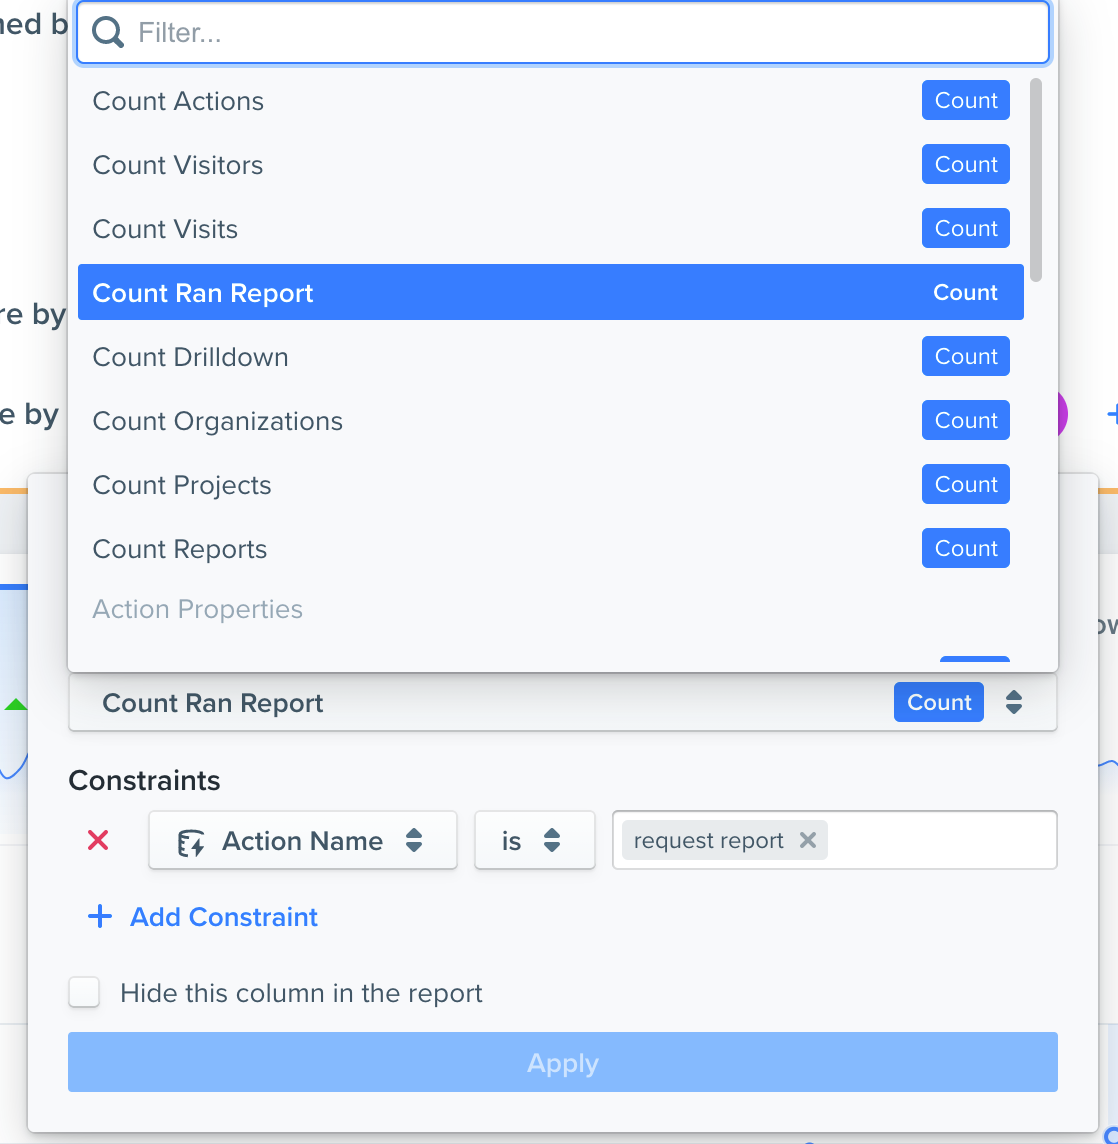 You can also add constraints to measures. For example, to show a count of users who did a specific action, you can define what is included in the count totals.